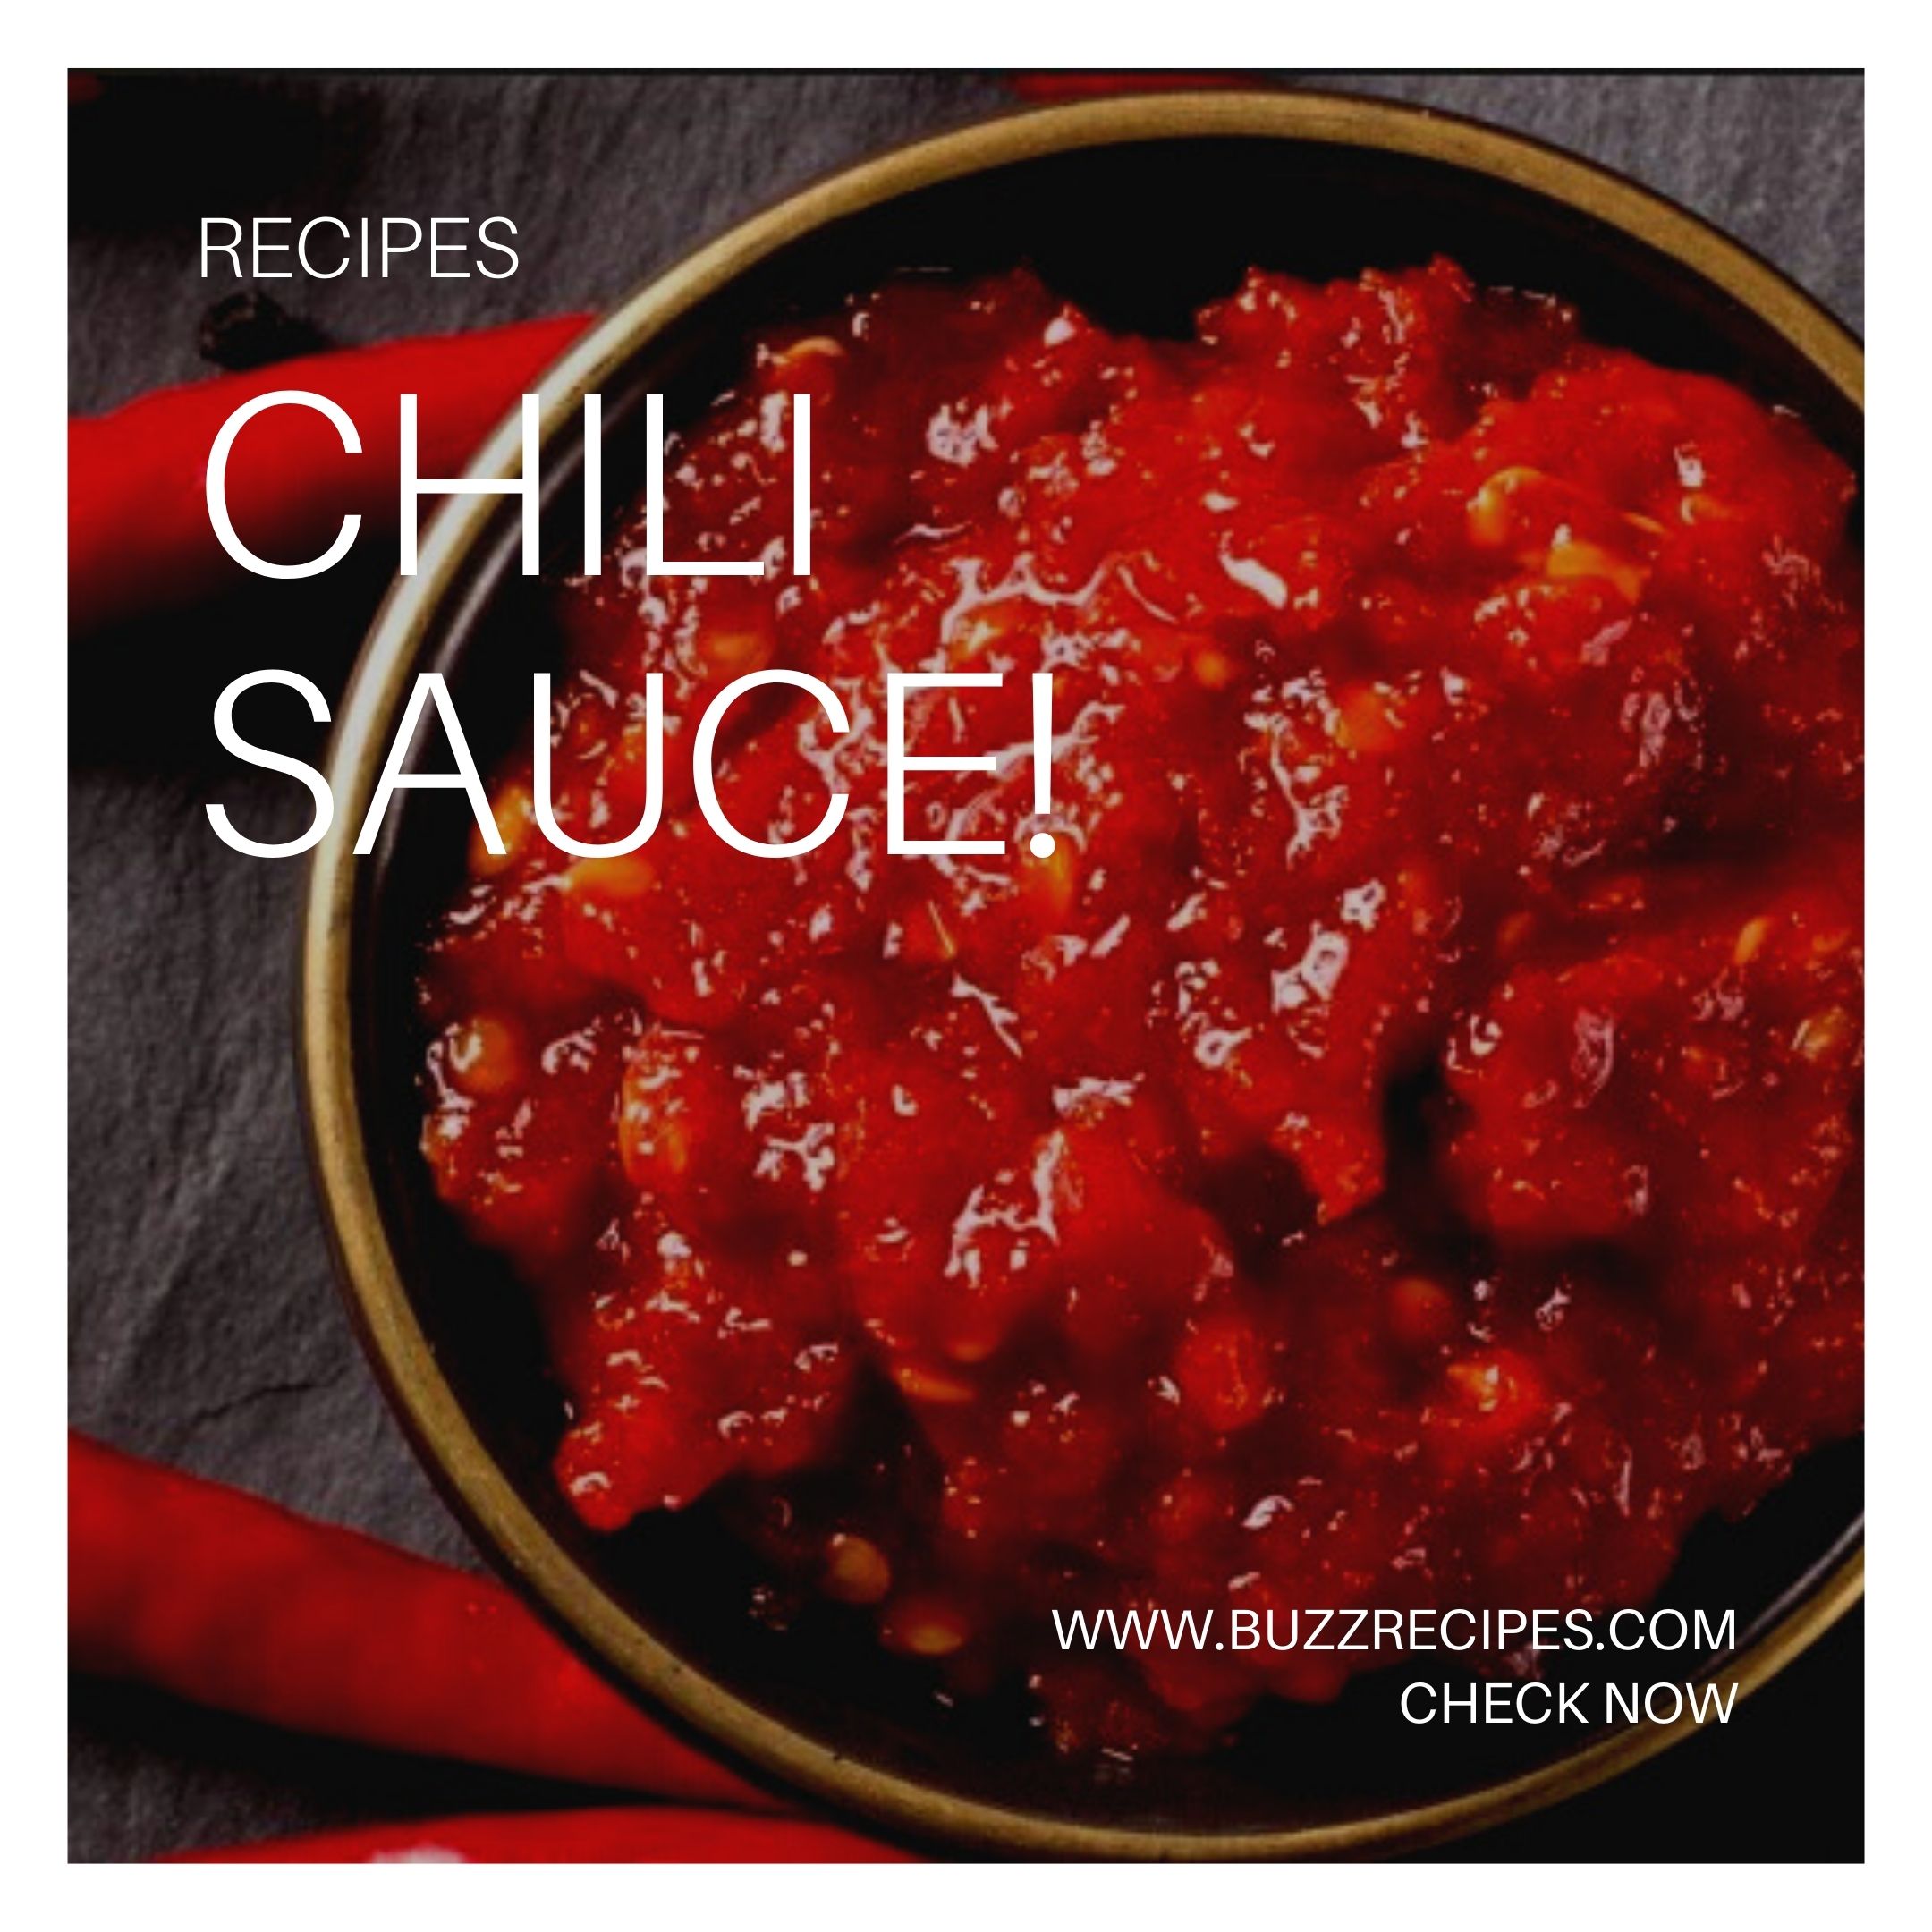 Hot Sauce Recipes - Chili Pepper Madness,Chili Sauce Recipe | Allrecipes,The Best Spicy Sweet Chili Sauce! - The Flavor Bender